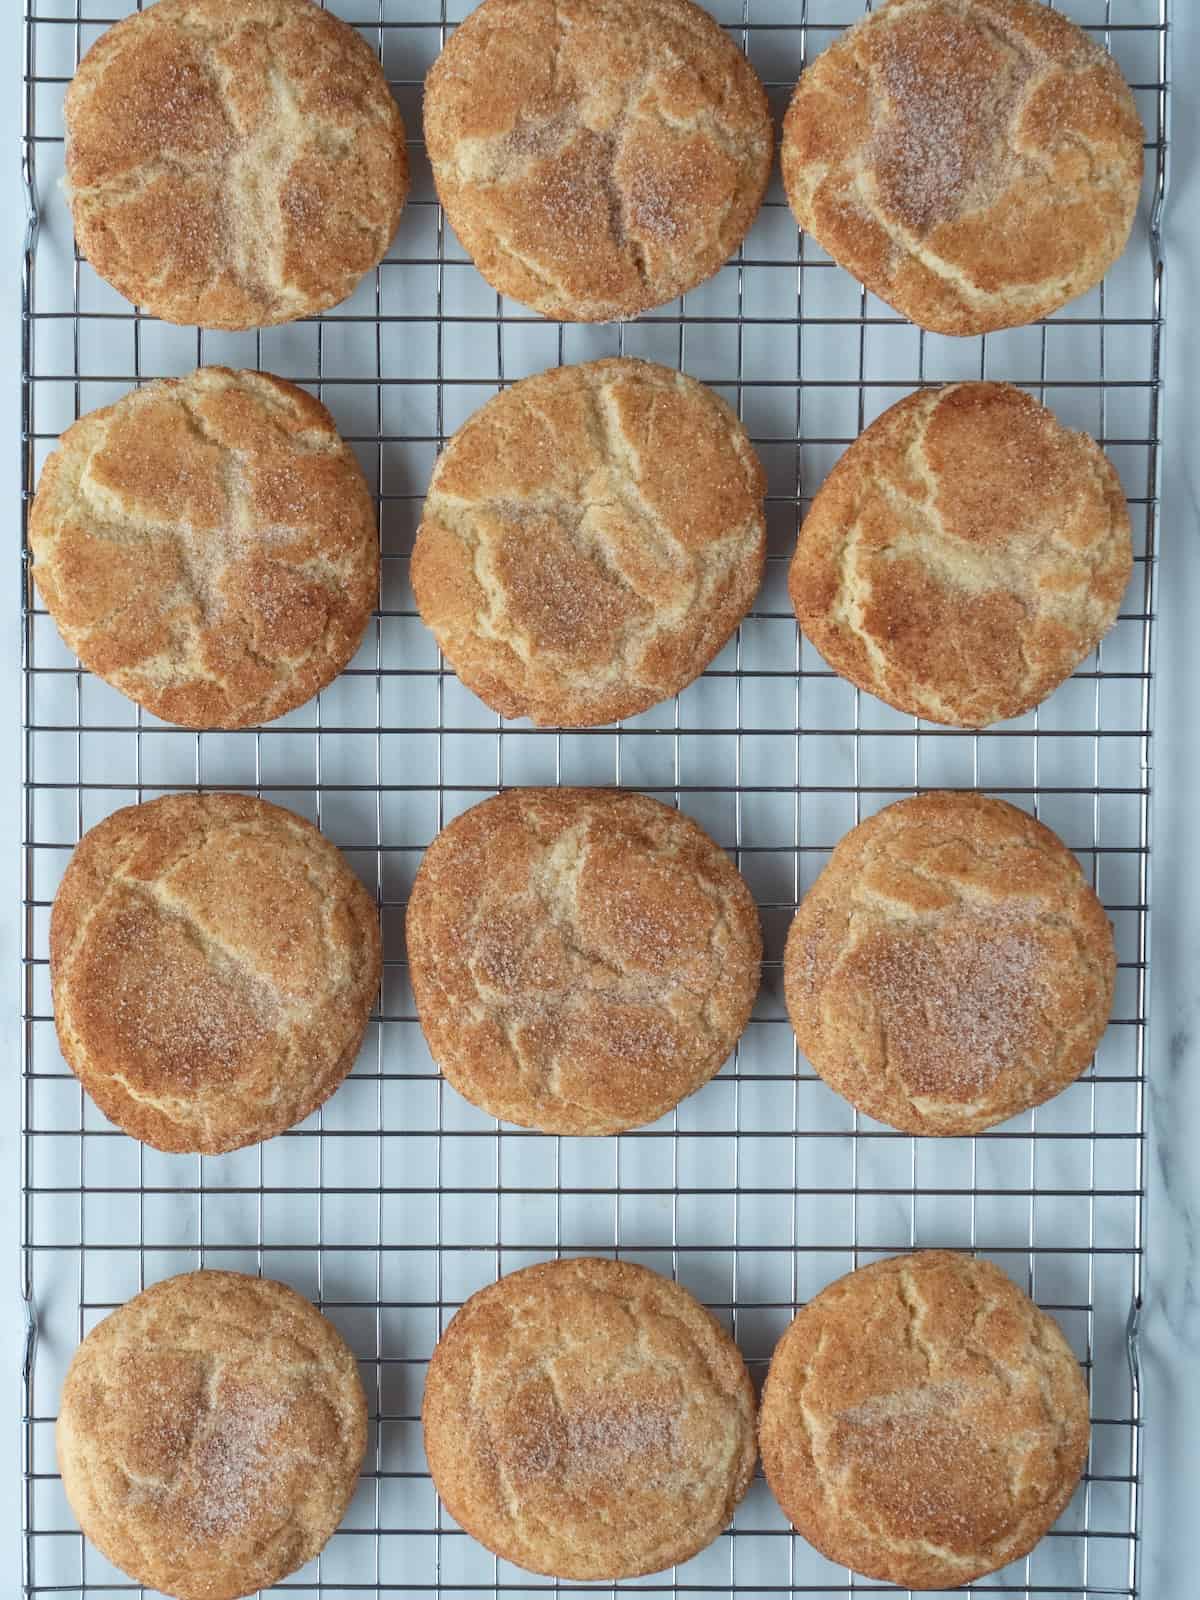 A wire rack with twelve snickerdoodle cookies in a grid, being cooled after baking.